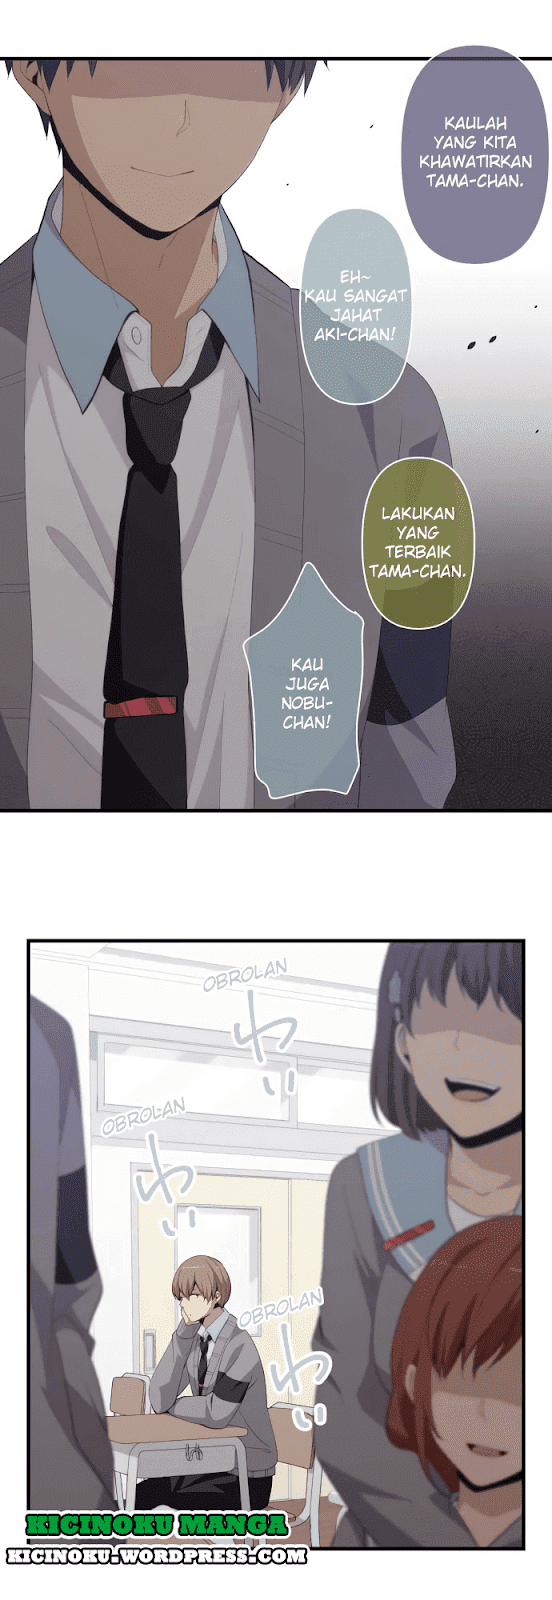 ReLIFE Chapter 203